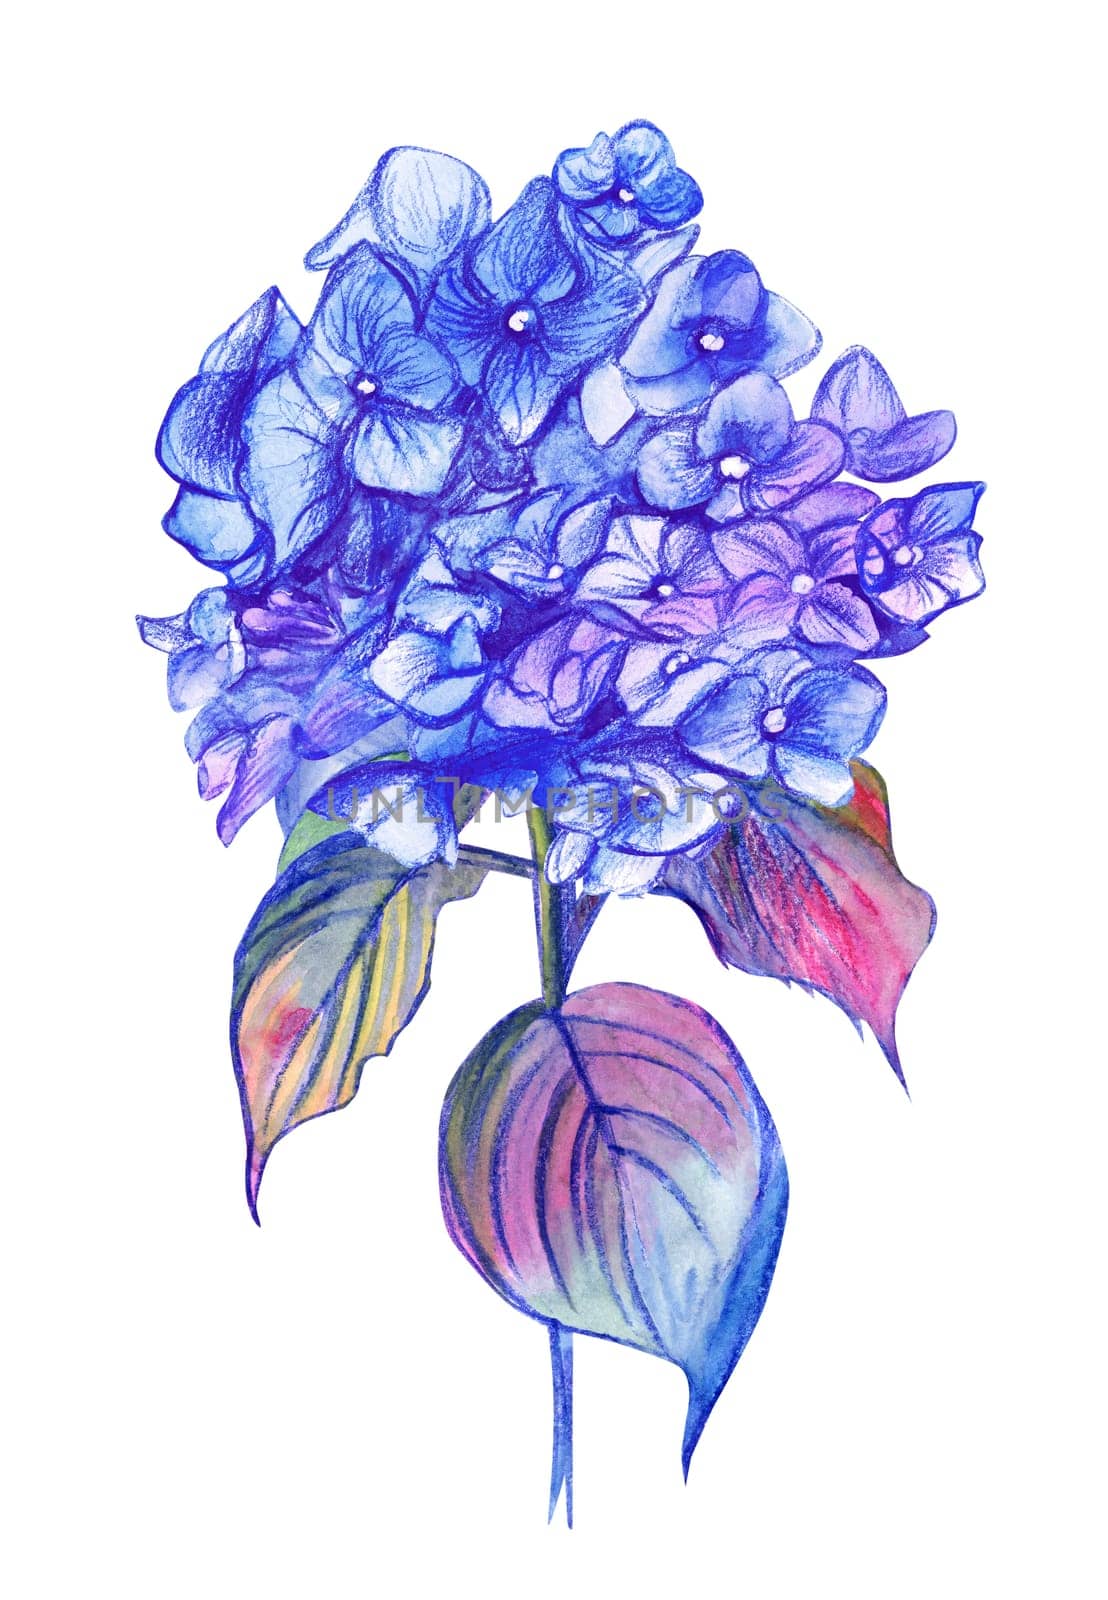 Flower of Hydrangea in blue hues painted in watercolor for cards and print design isolated on white background